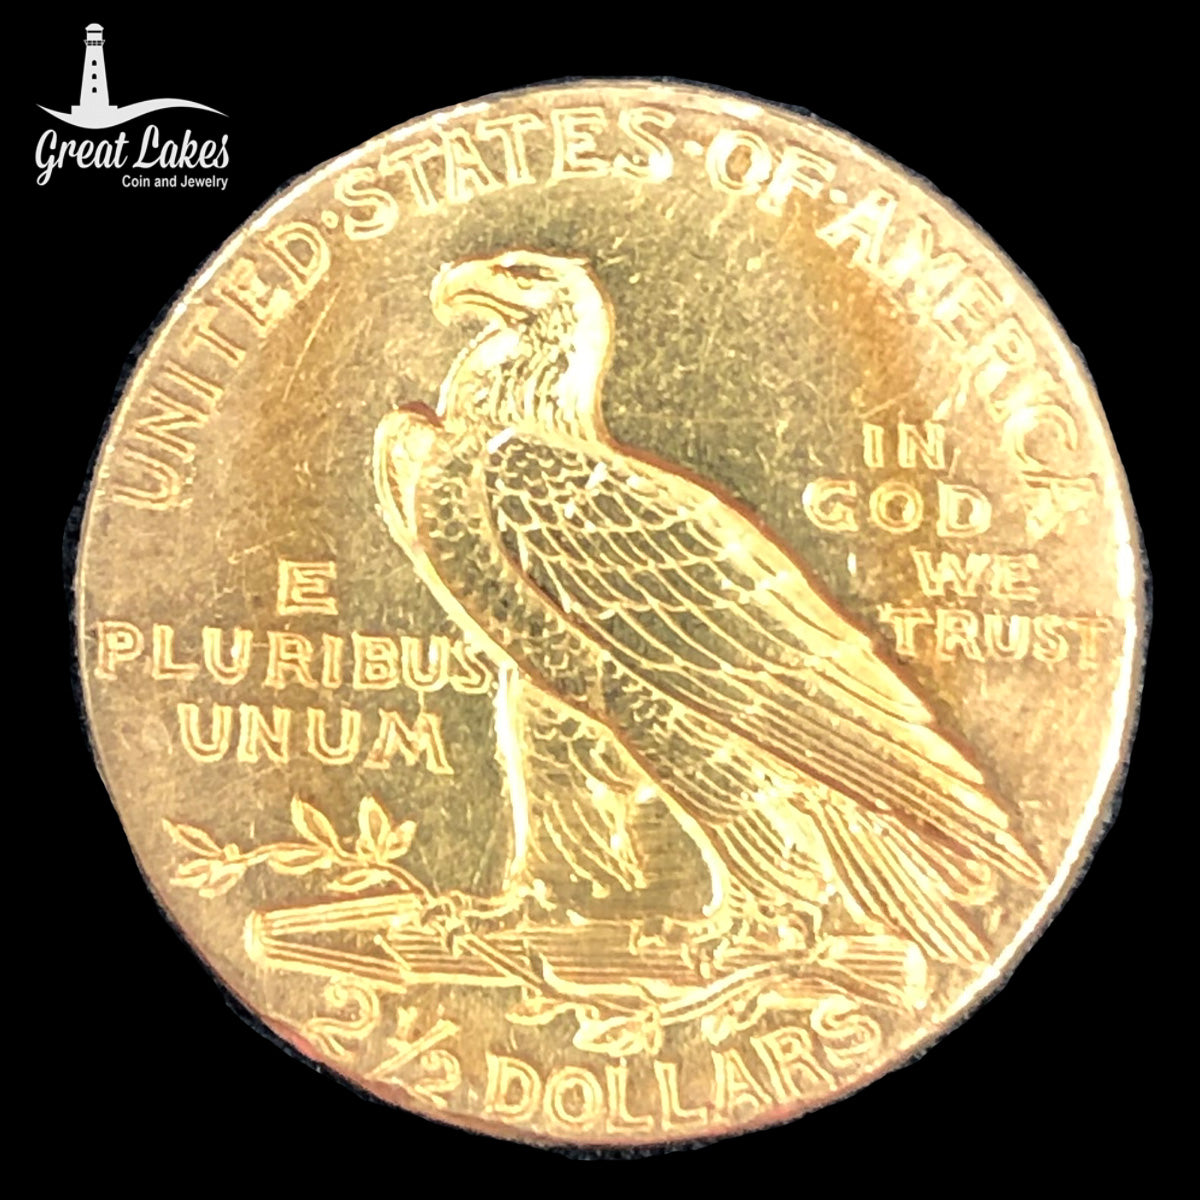 1913 $2.5 Indian Gold Quarter Eagle (Ex Jewelry)